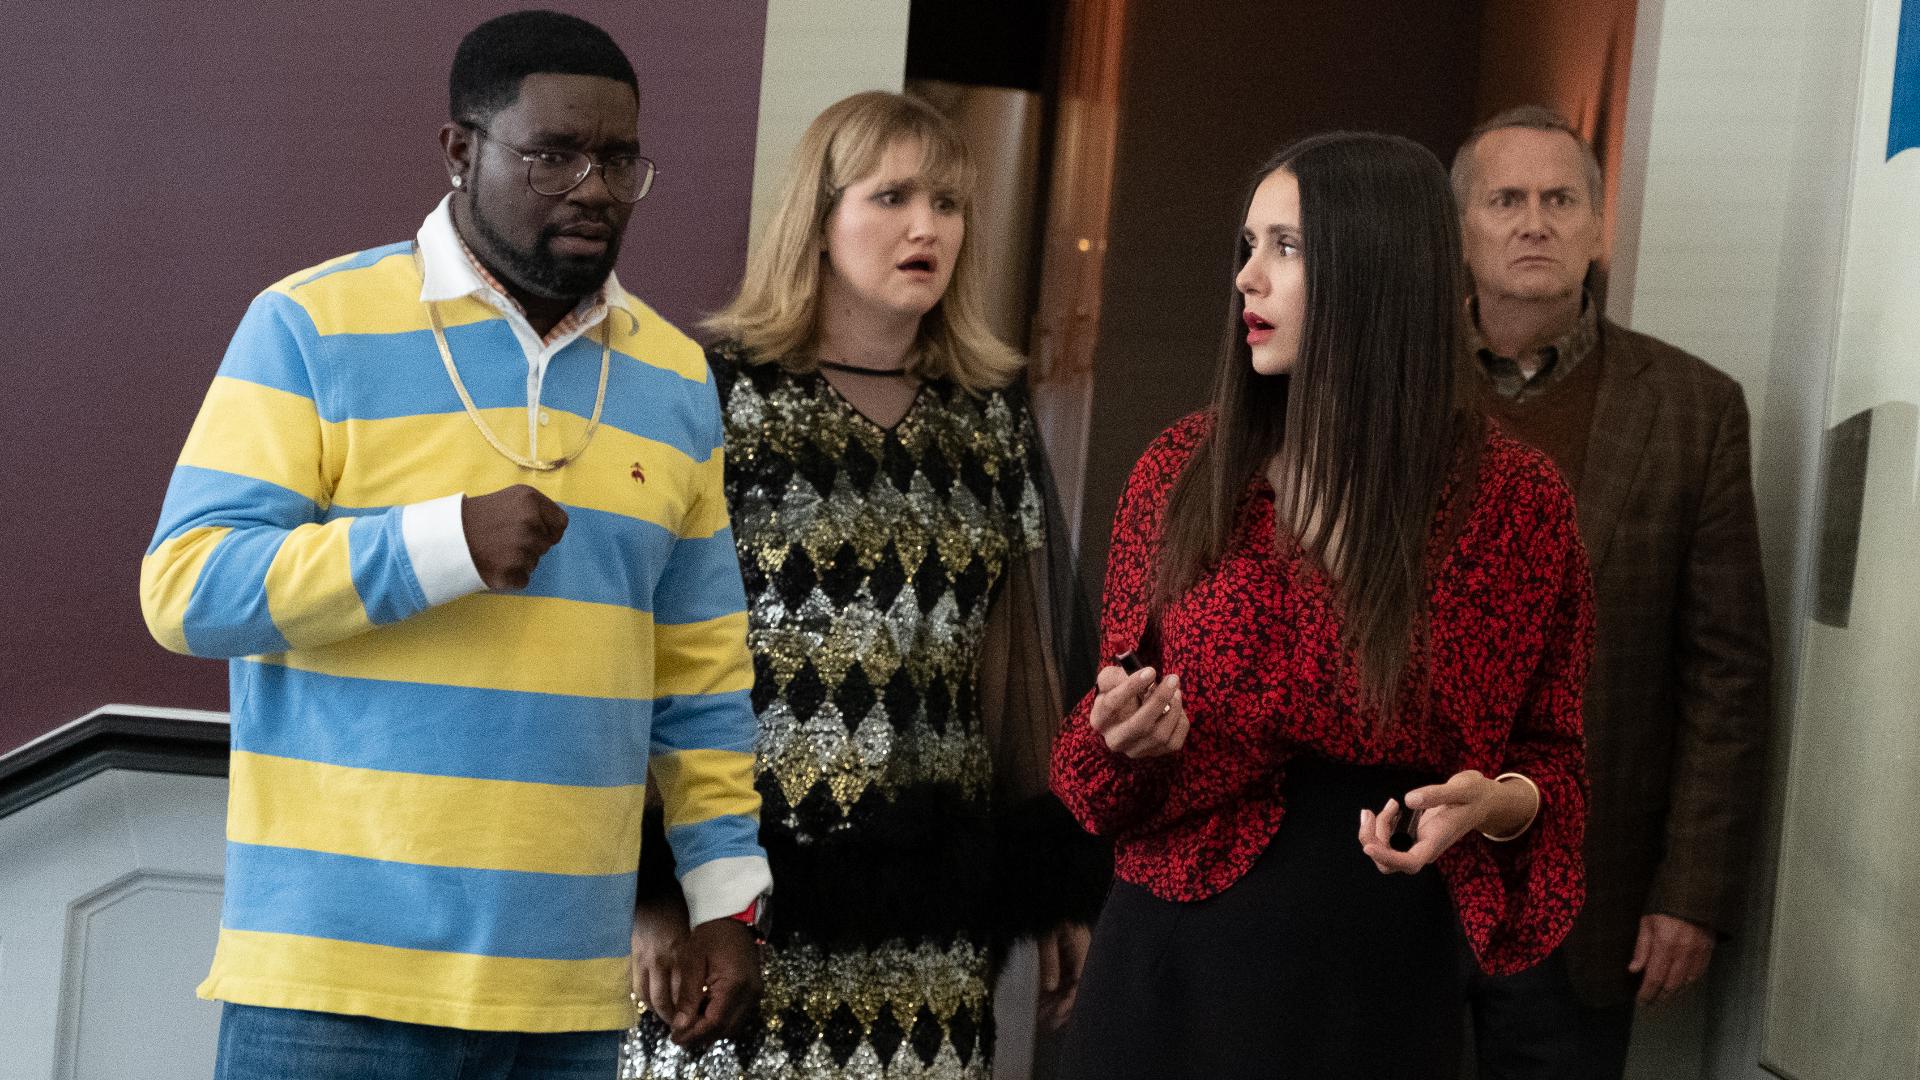 "Reunion," starring Lil Rel Howery, Nina Dobrev, Billy Magnussen, Jillian Bell and Chace Crawford, is available to buy or rent digitally Friday, June 28.